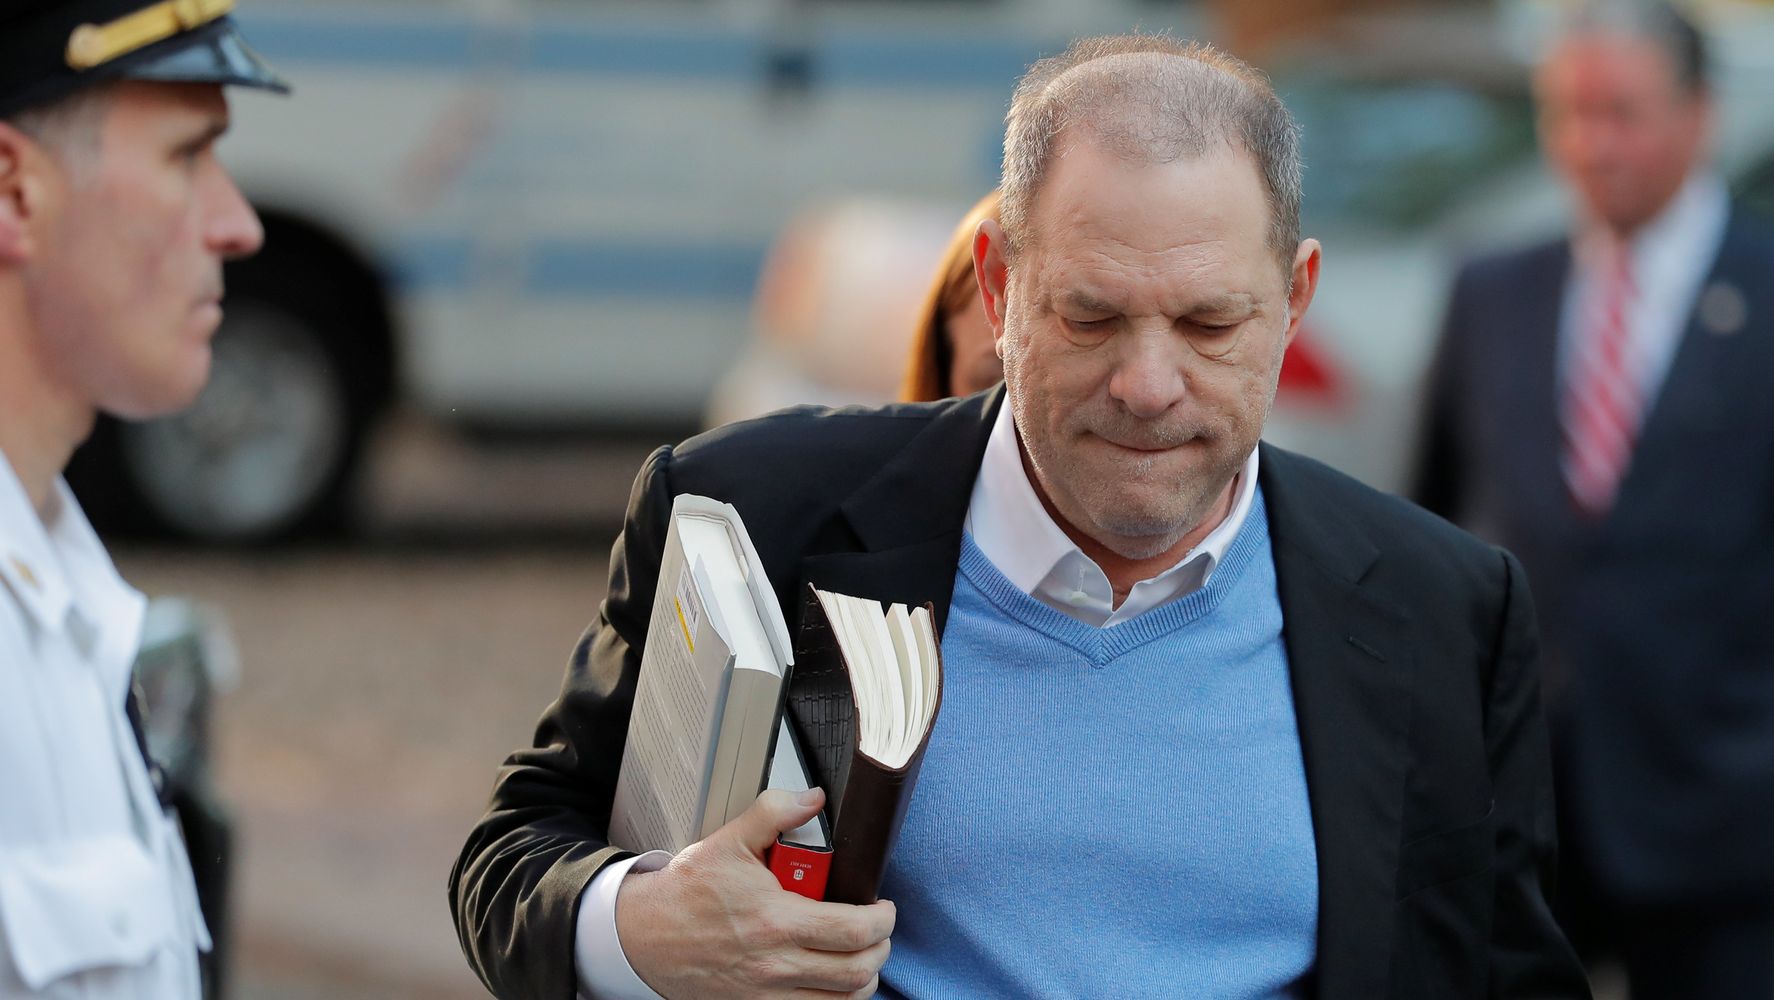 Harvey Weinstein Turns Himself In To Police For Alleged Sex Crimes Huffpost News 4741